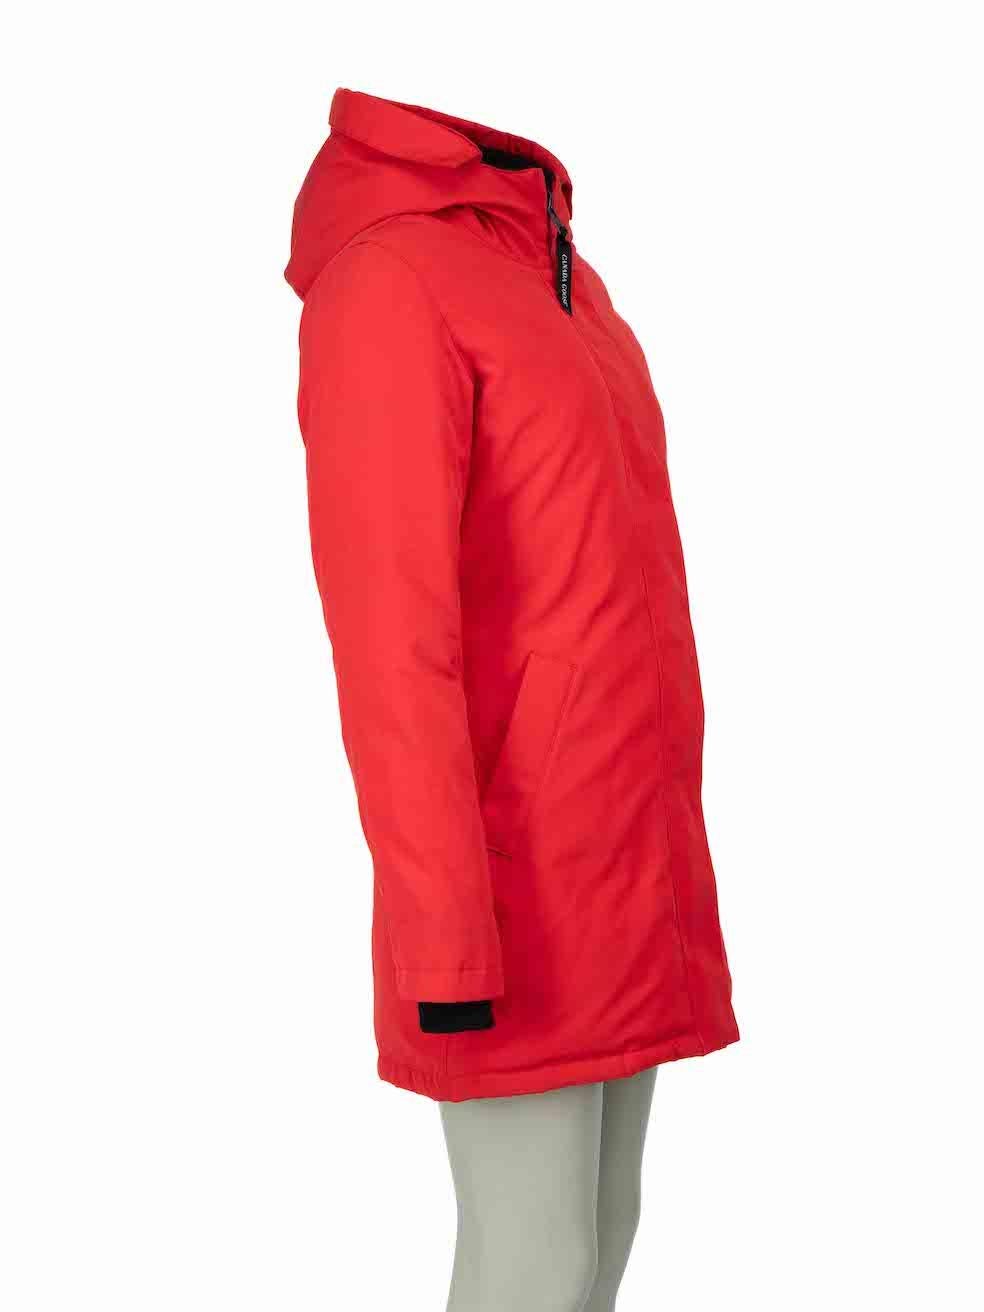 CONDITION is Very good. Hardly any visible wear to coat is evident on this used Canada Goose designer resale item. Please note that the detachable fur trim is not included.
 
Details
Red
Polyester
Down coat
Quilted lining
Zip and snap button